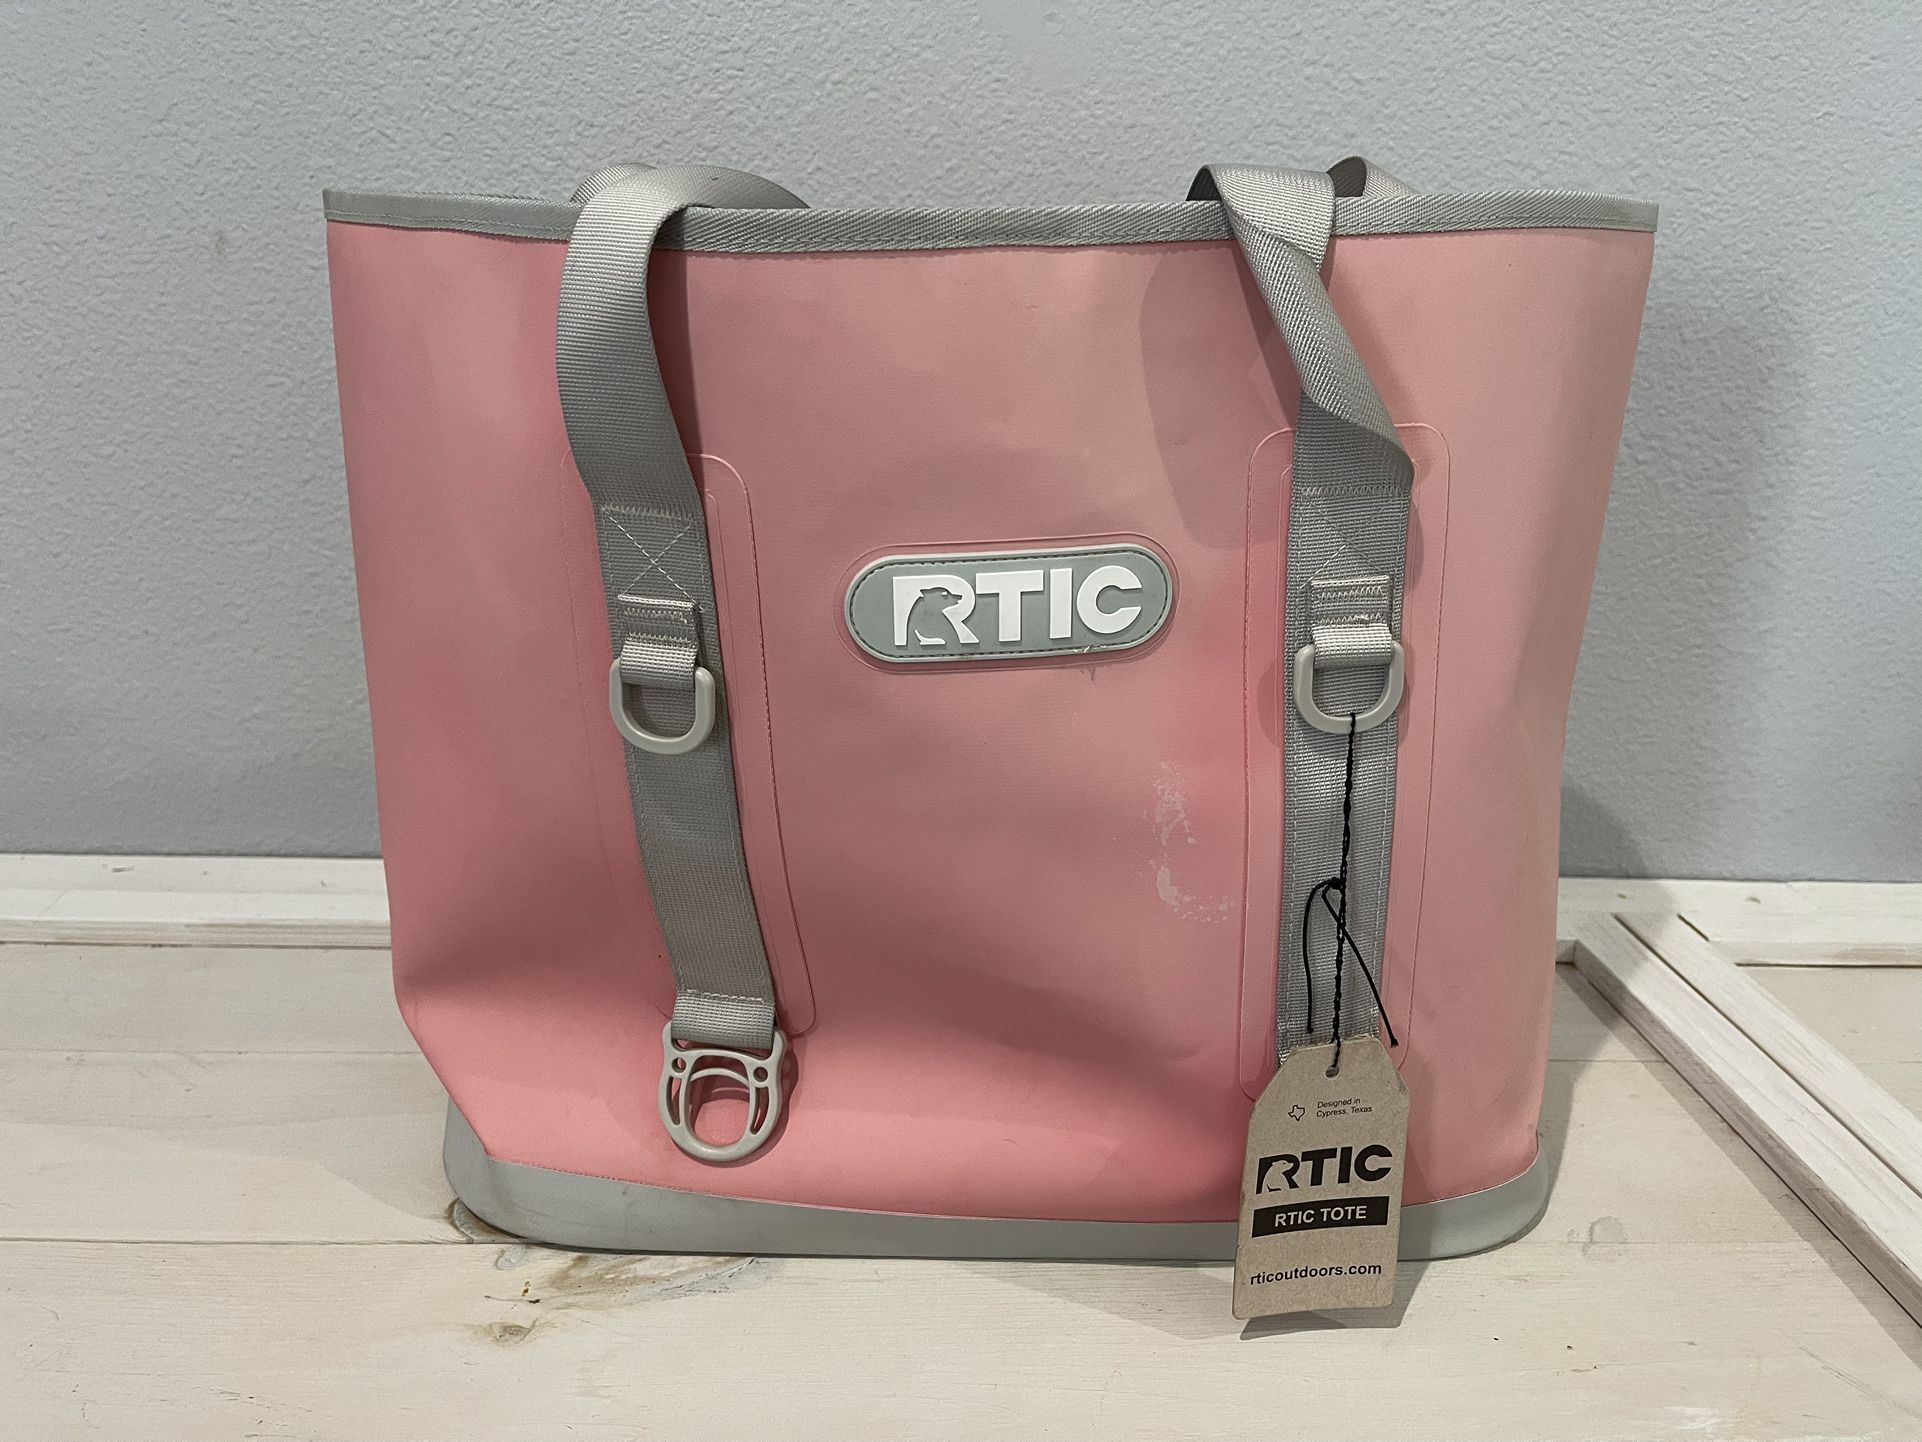 RTIC Large Beach Tote Bag Pink Rare Color Waterproof Lightly Used With Tags